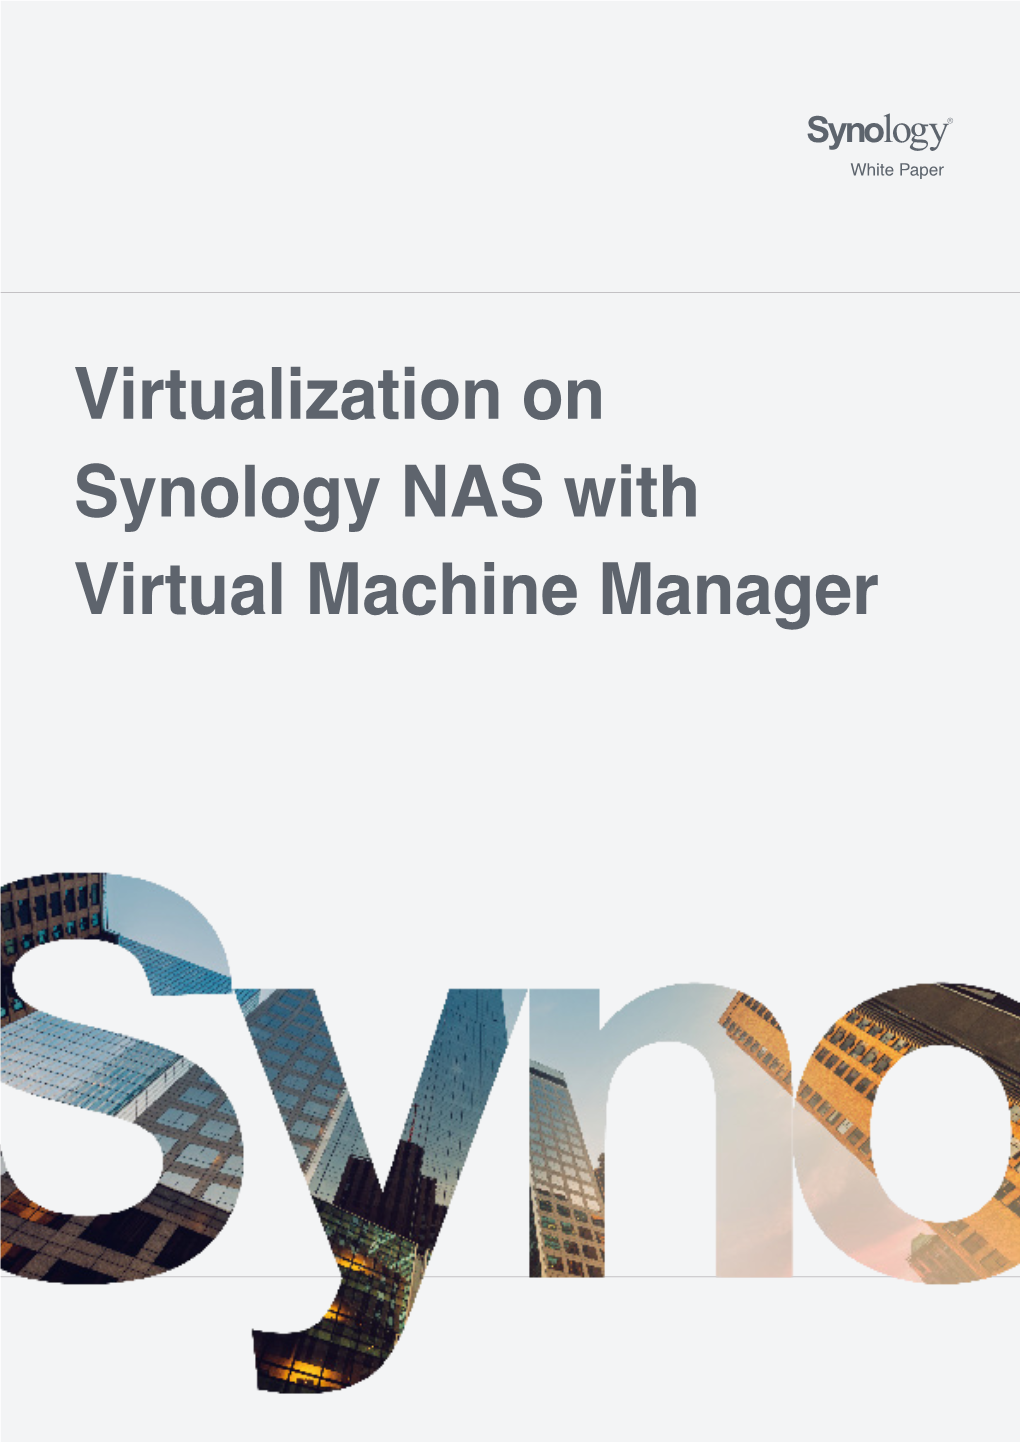 Virtualization on Synology NAS with Virtual Machine Manager